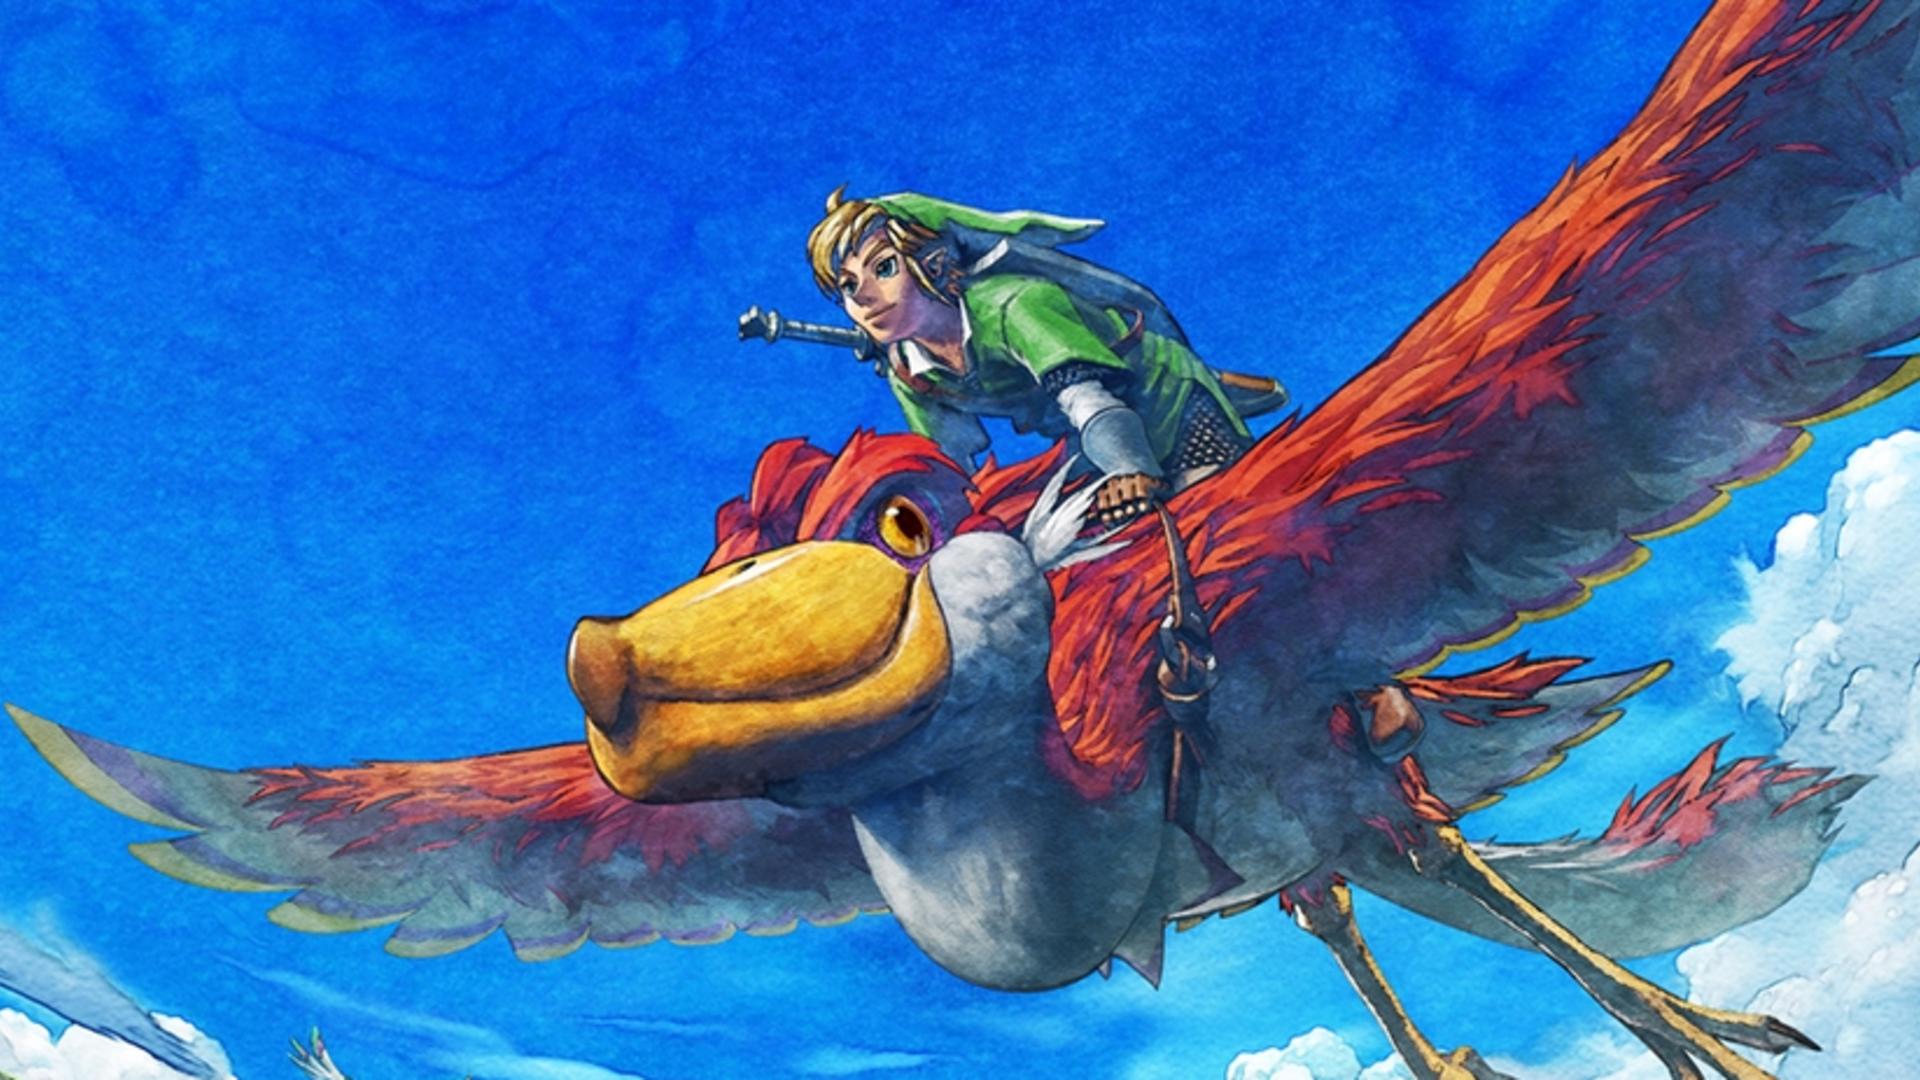 zelda-skyward-sword-hd-footage-shows-a-free-moving-camera-has-been-added-vgc